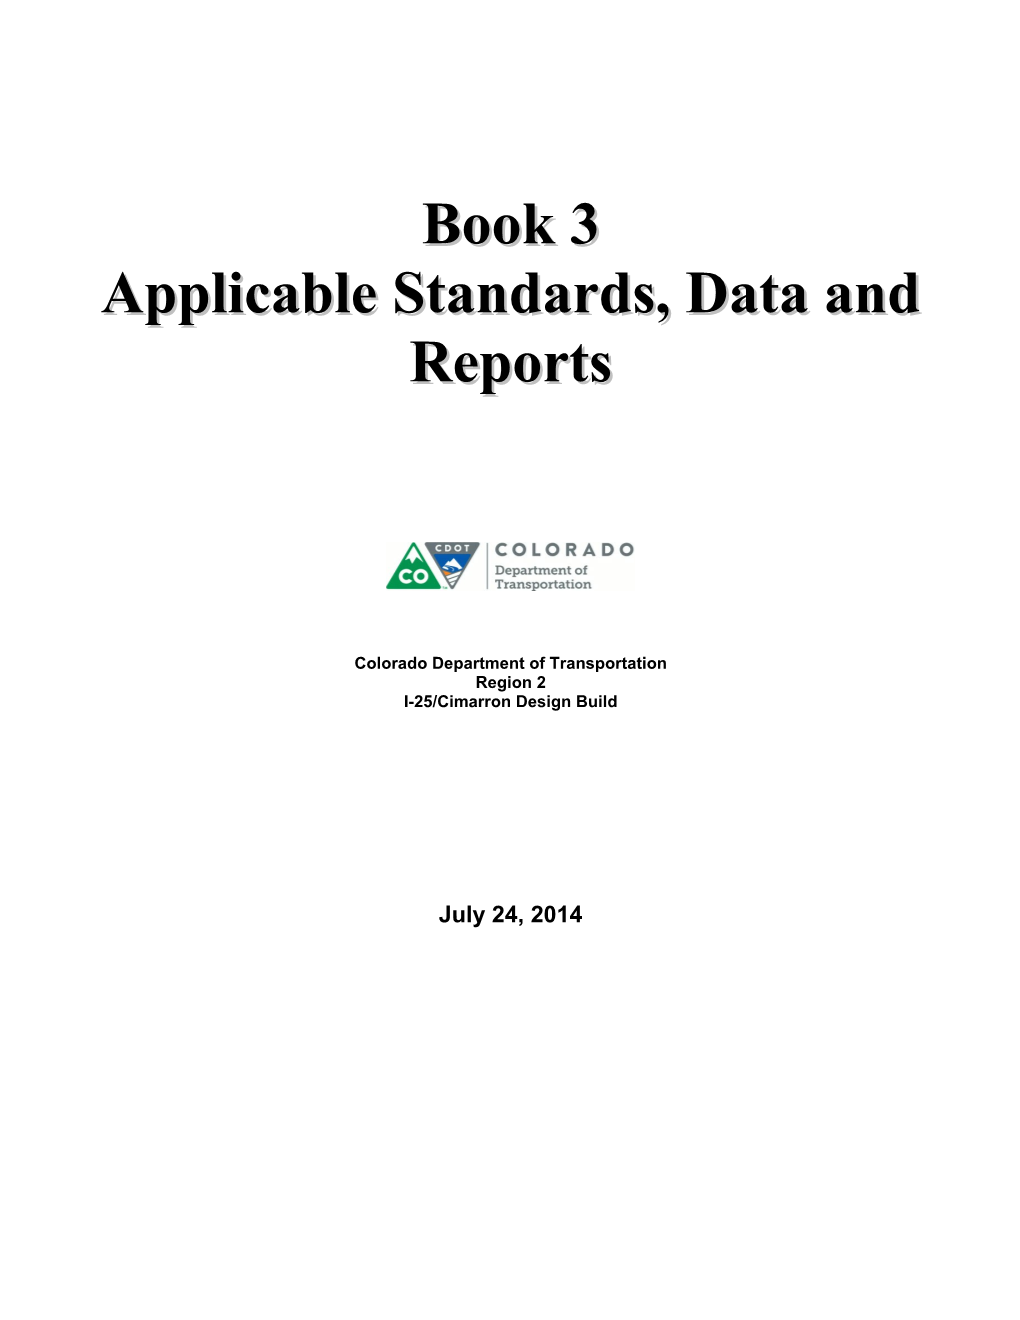 Applicable Standards, Data and Reports